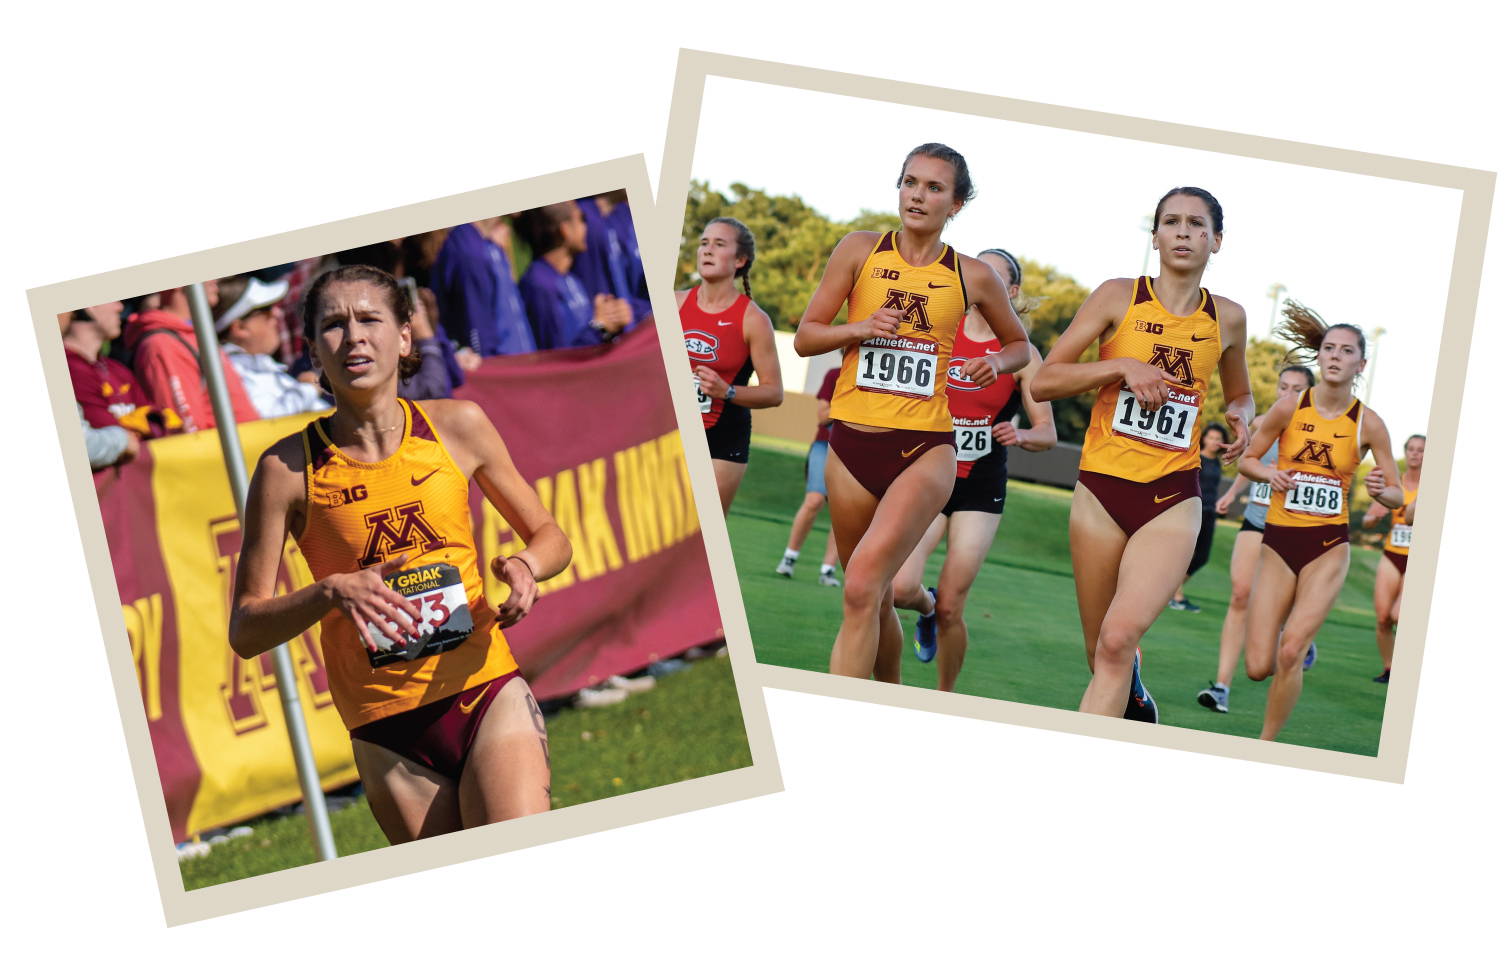 Elena Hayday competing for the University of Minnesota